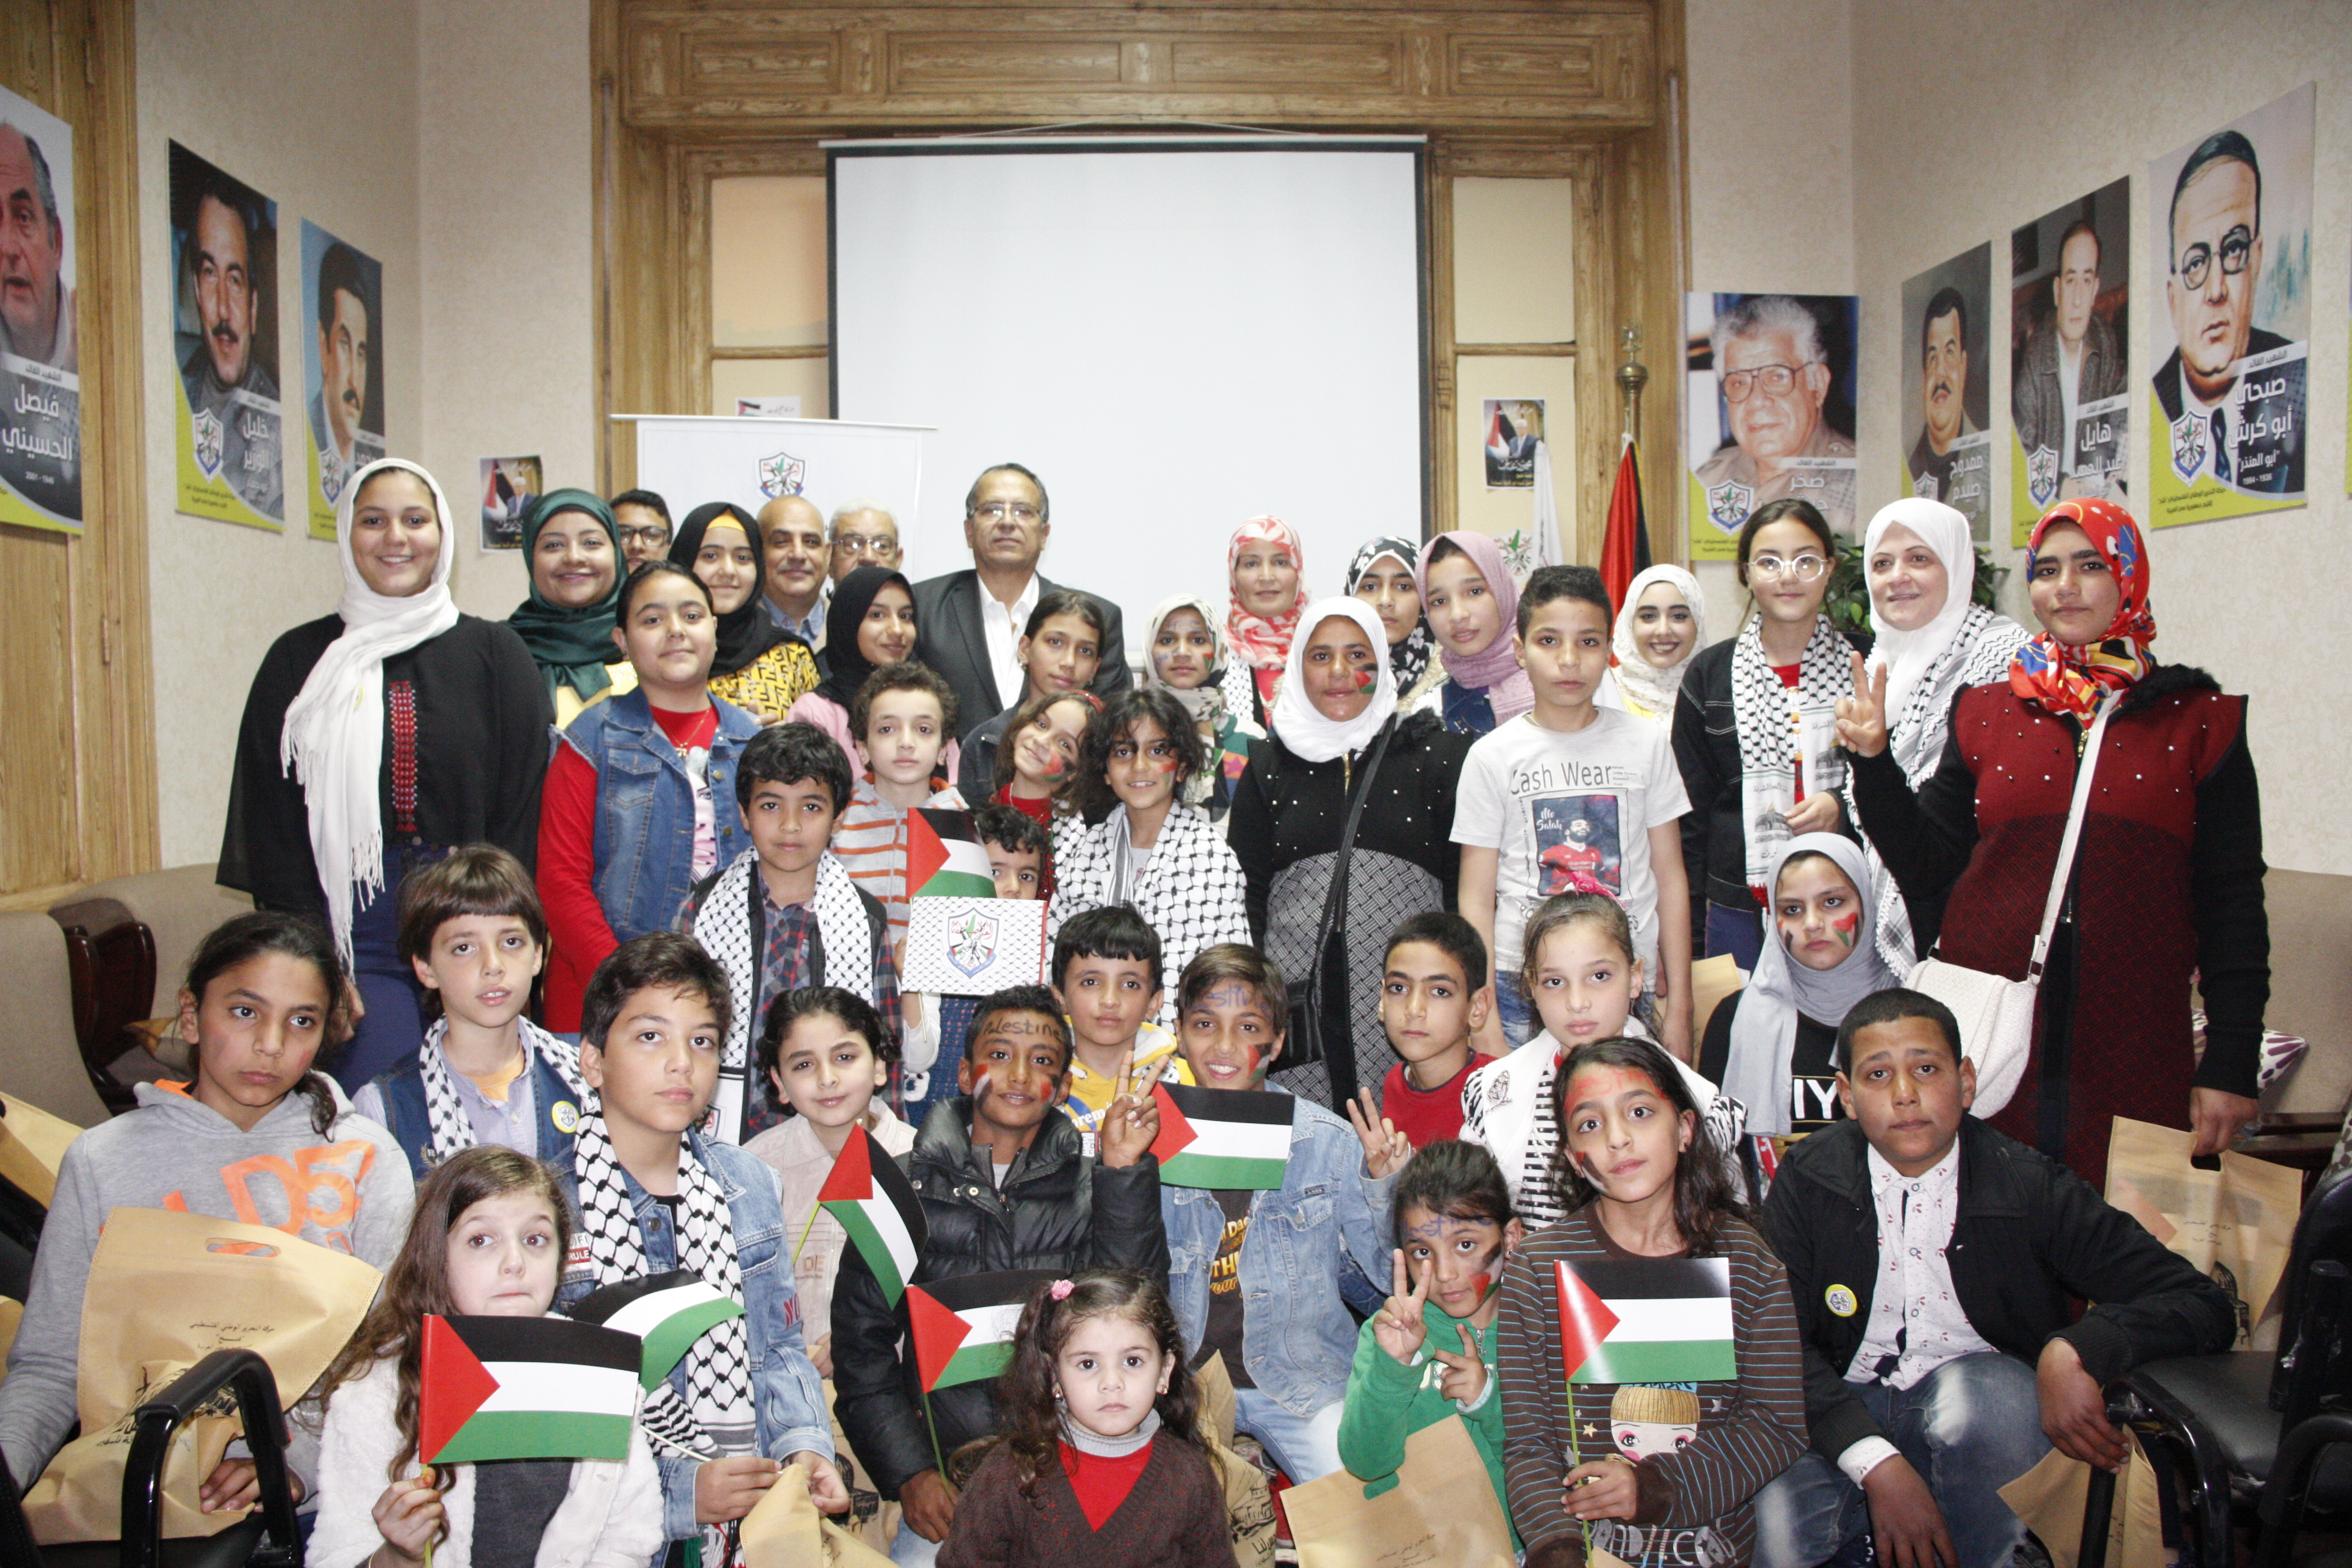 Fatah movement in Egypt marks orphans day